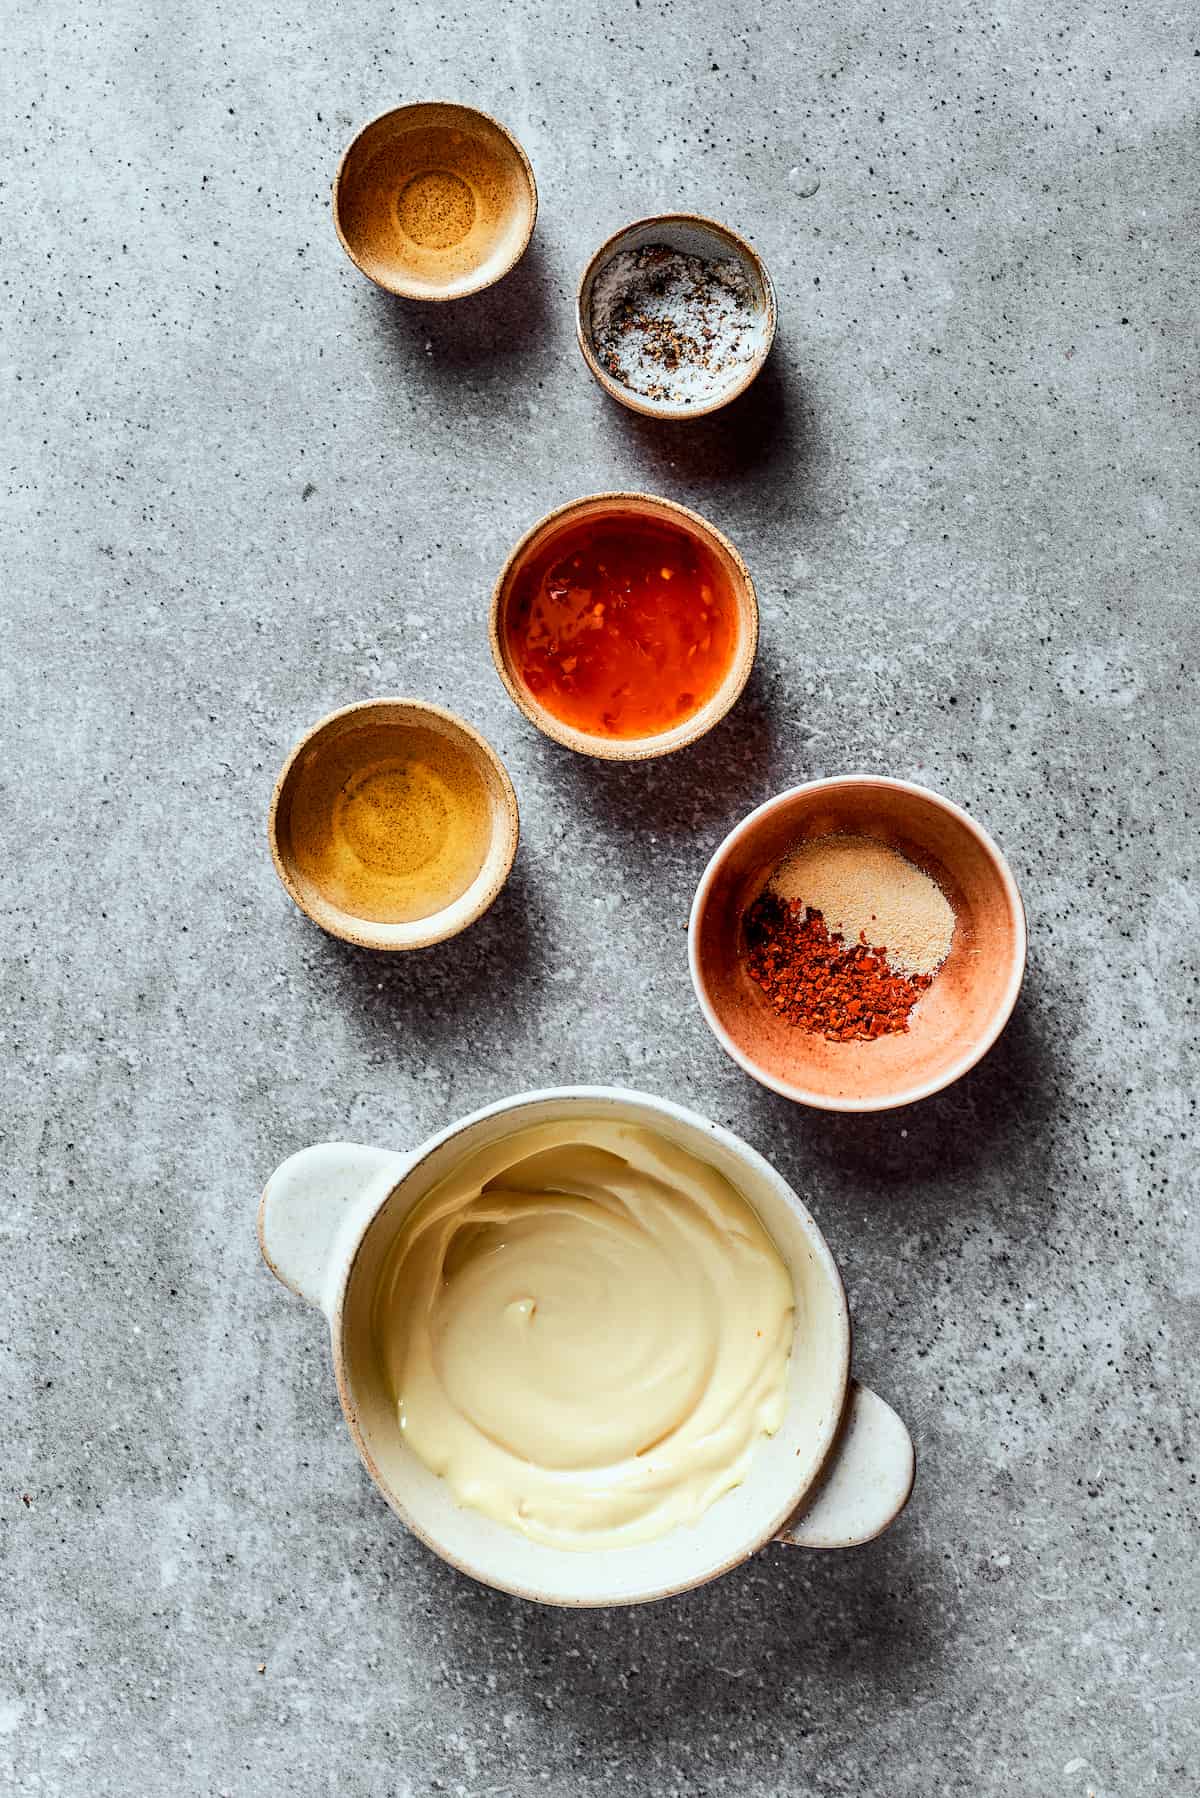 Overhead view of the ingredients needed for bang bang sauce: a bowl of mayonnaise, a bowl of sweet chili sauce, a bowl of honey, a bowl of rice vinegar, a bowl of salt and pepper, and a bowl of garlic powder and chili flakes.